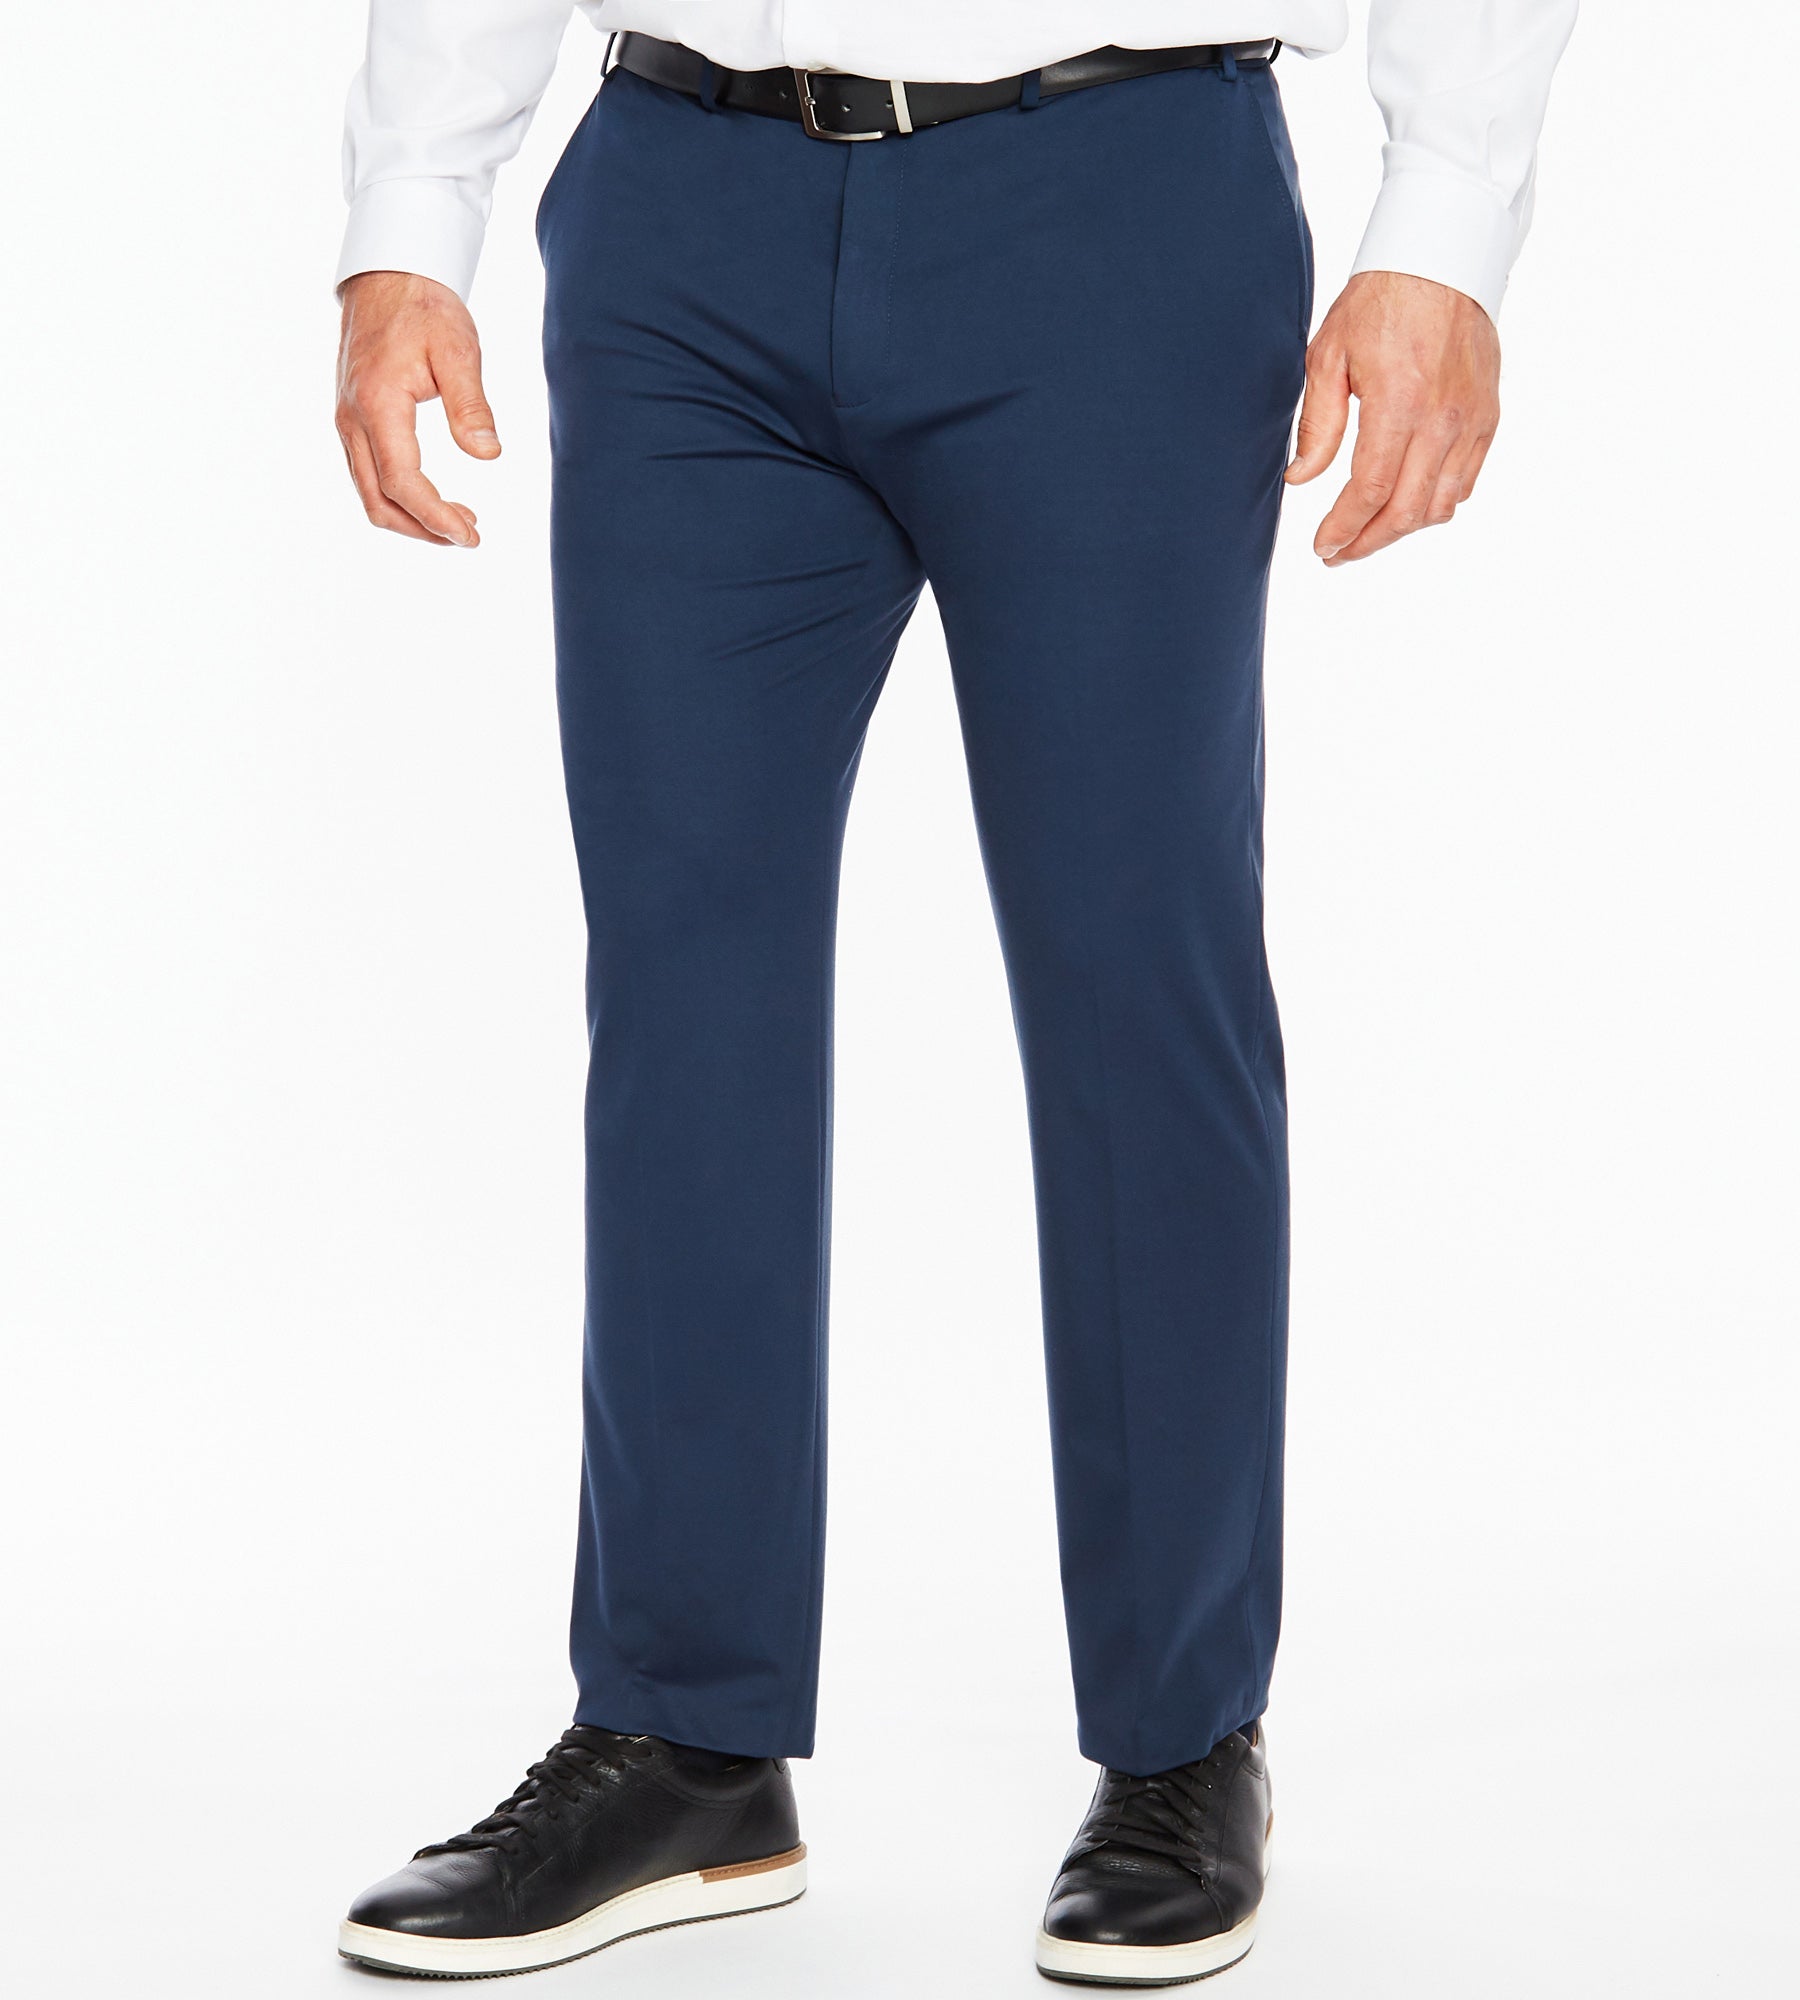 Clothing & Shoes - Bottoms - Pants - Mr. Max Stretch Ankle Pant